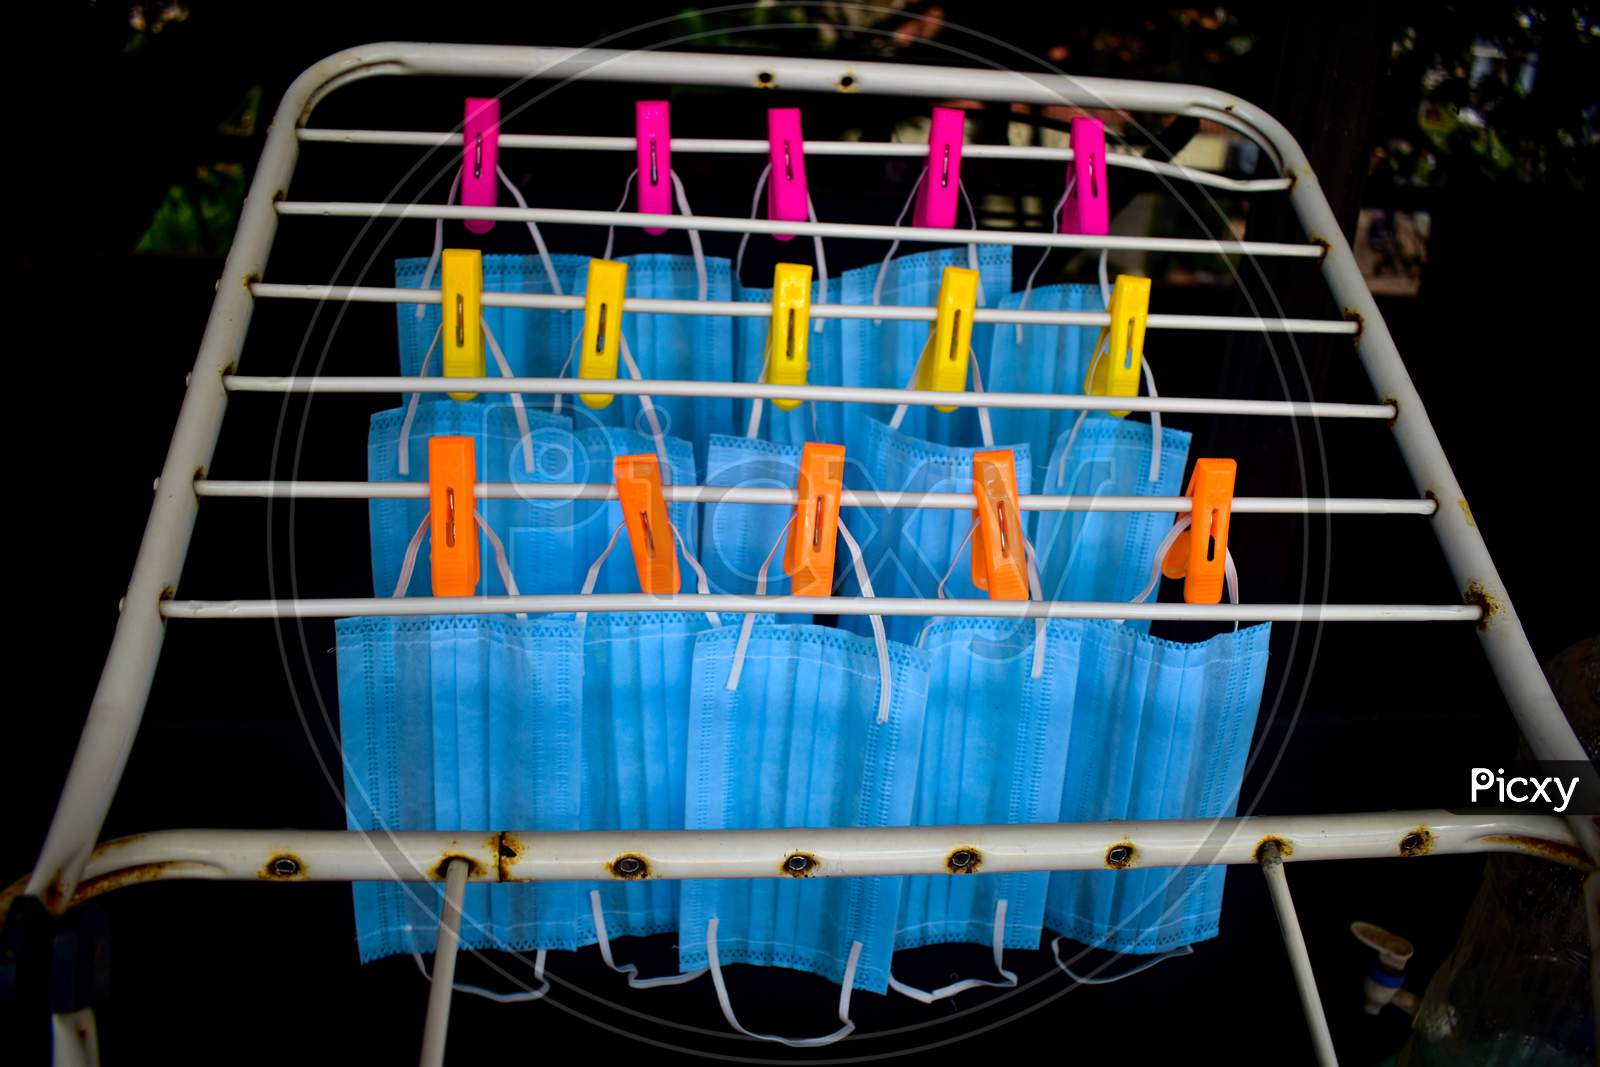 Corona Virus Pandemic Masks Being Hanged On A Cloth Rod After Cleaning. Reusable Blue Colored Face Masks